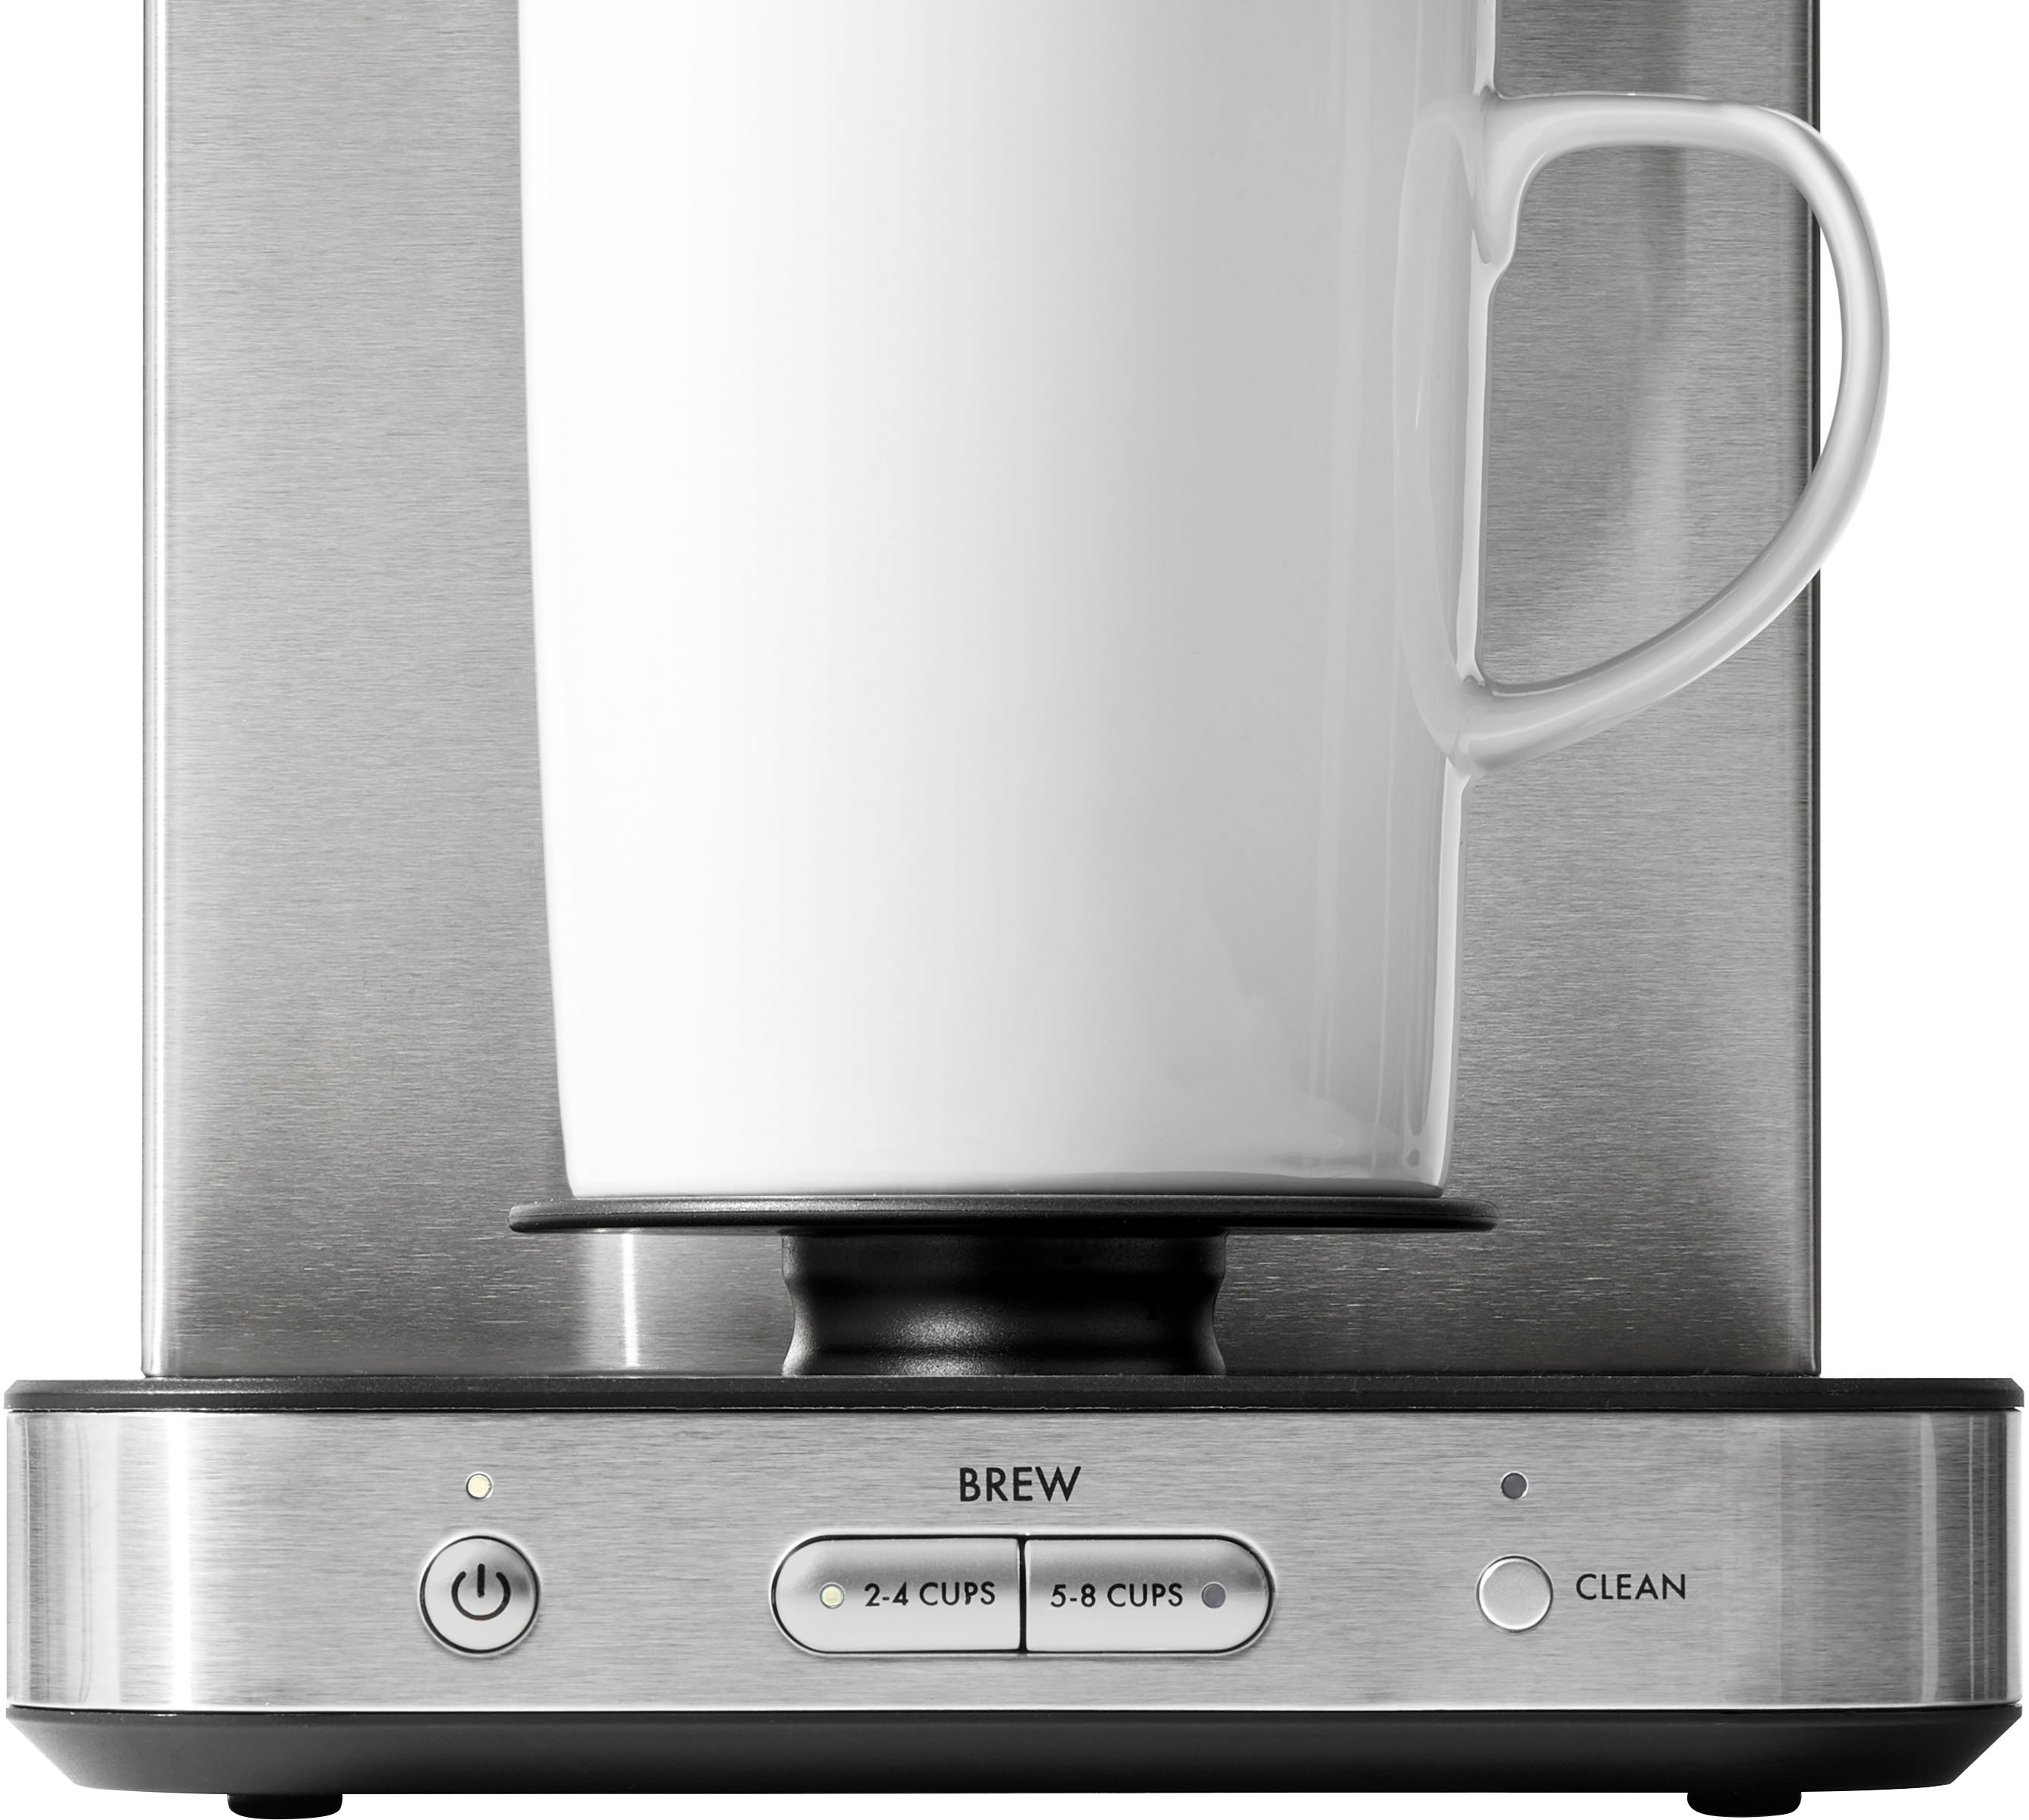 OXO Brew 8 Cup Coffee Maker Stainless Steel 8718800 - Best Buy